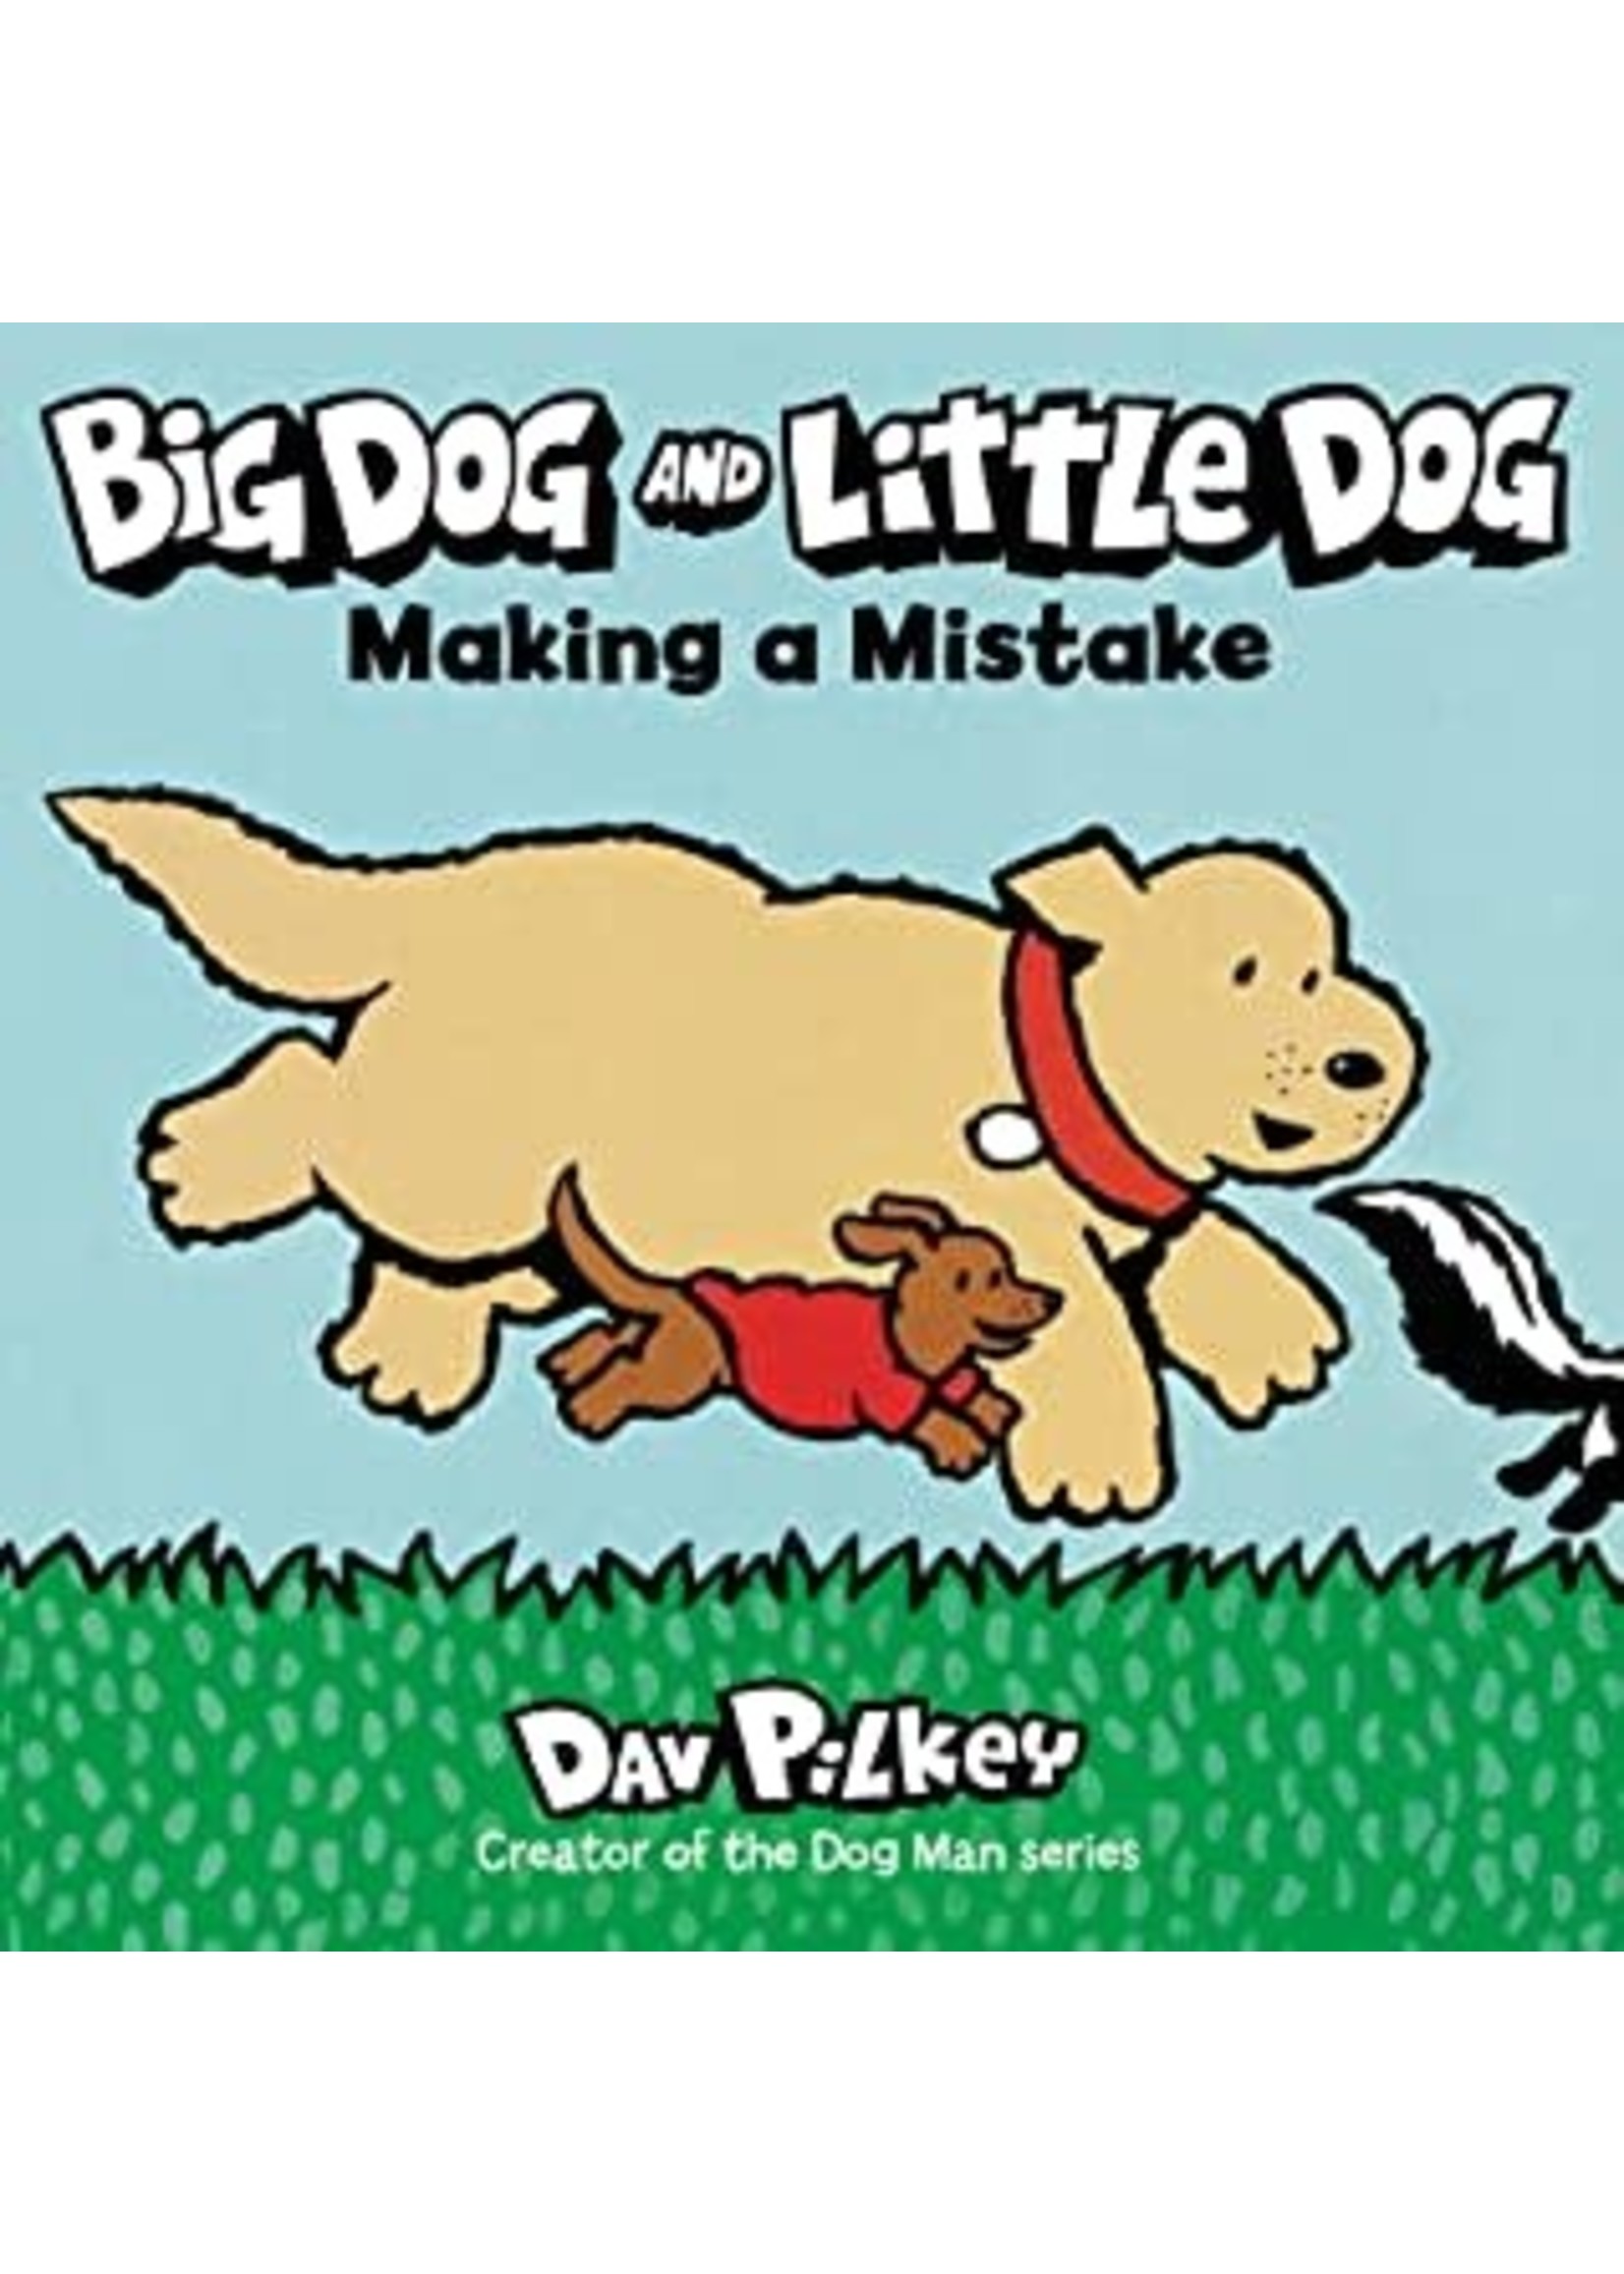 Big Dog and Little Dog Making a Mistake by Dav Pilkey